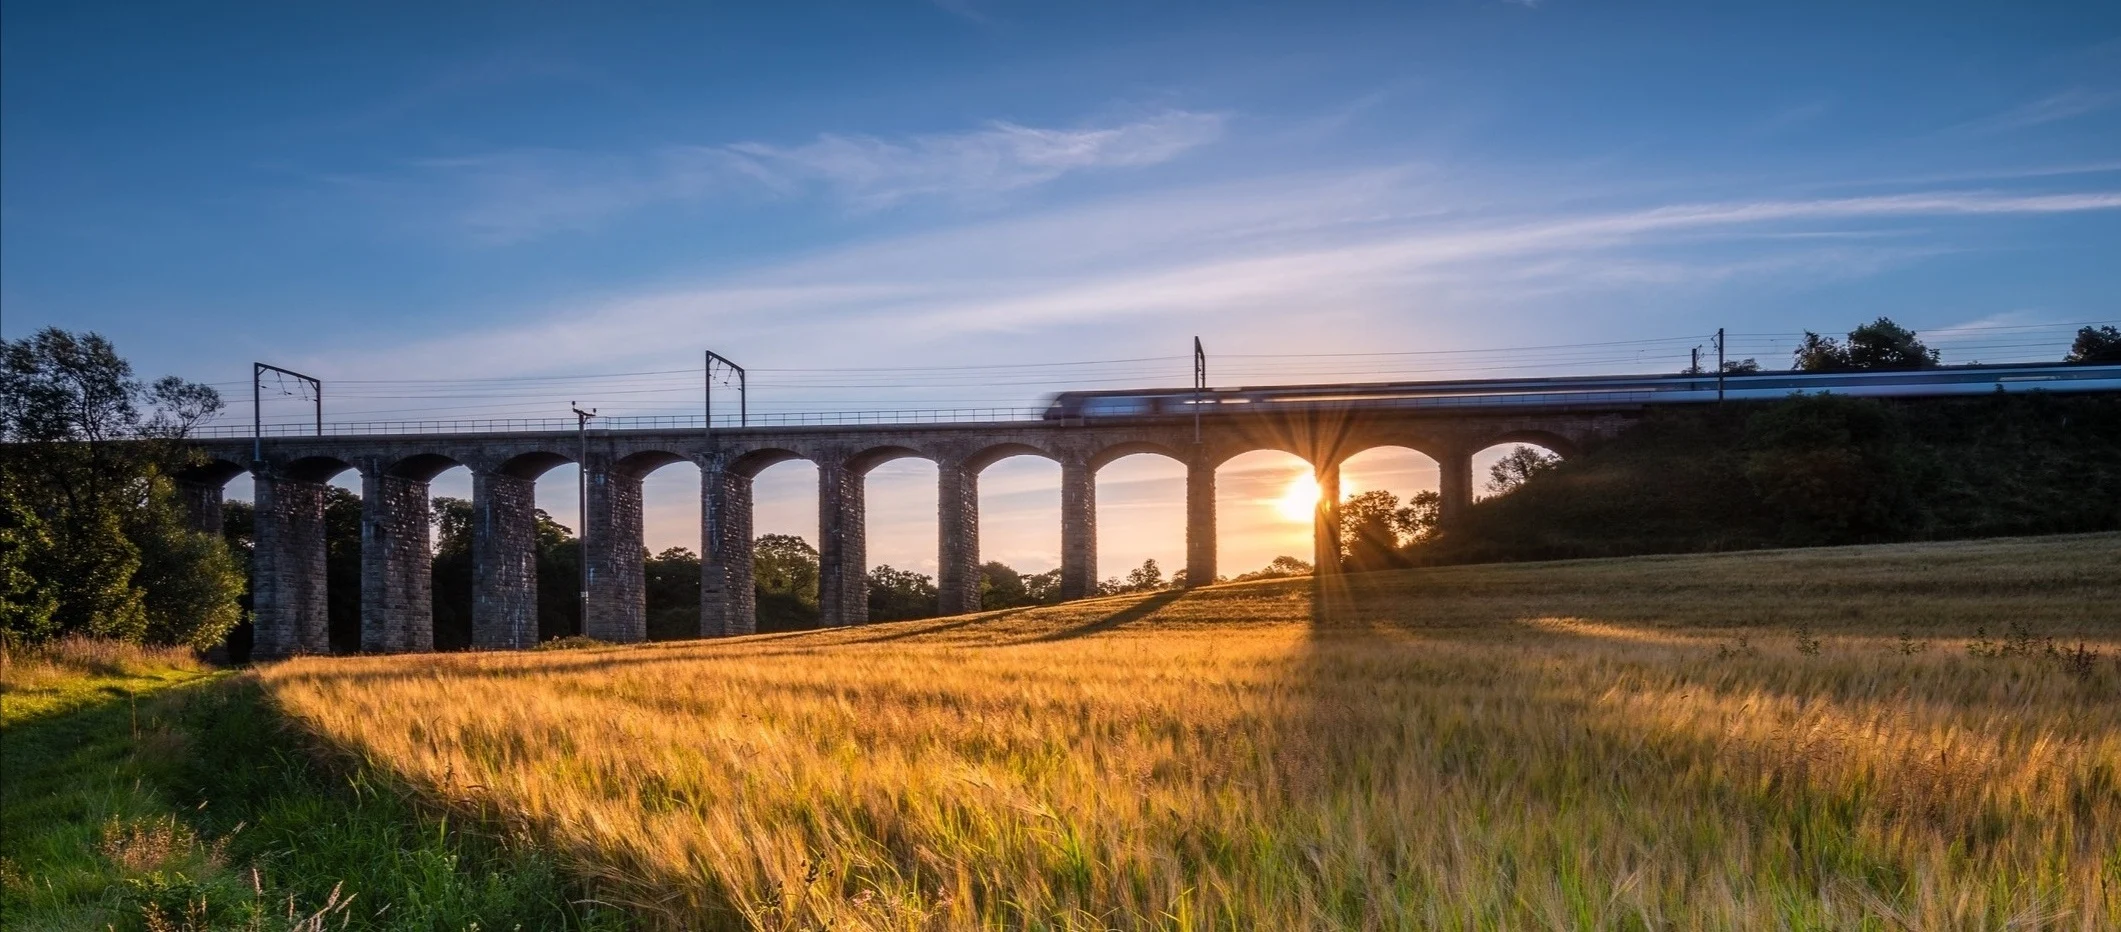 A train crosses a viaduct at sunset with a cornfield in front